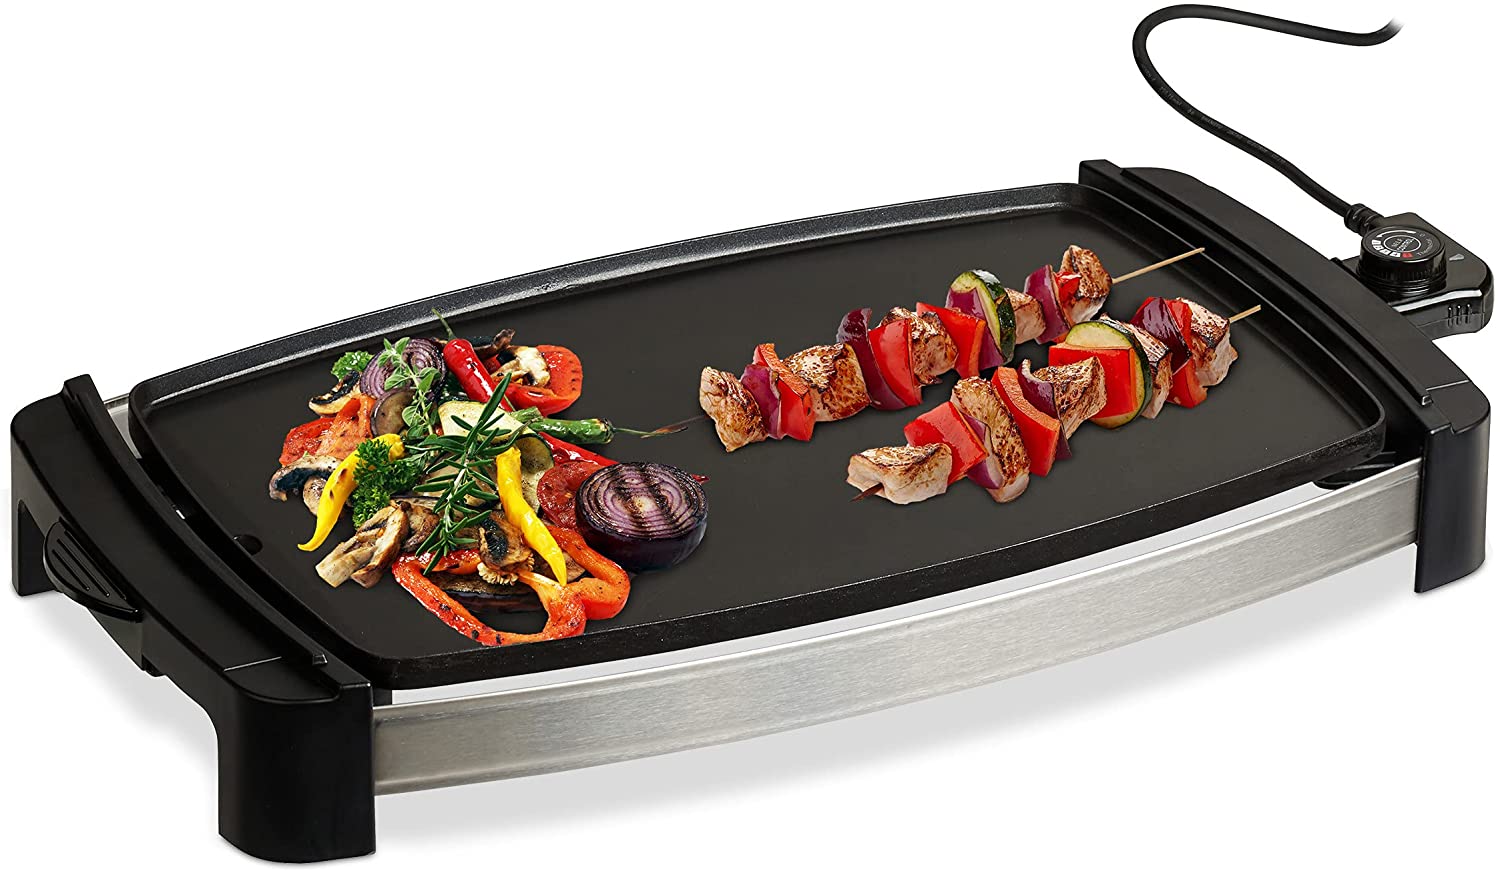 Relaxdays Electric Table Barbecue, Temperature Control, BBQ Electric Grill, 2000 Watt, Large Grill Area 45 x 30 cm, Black